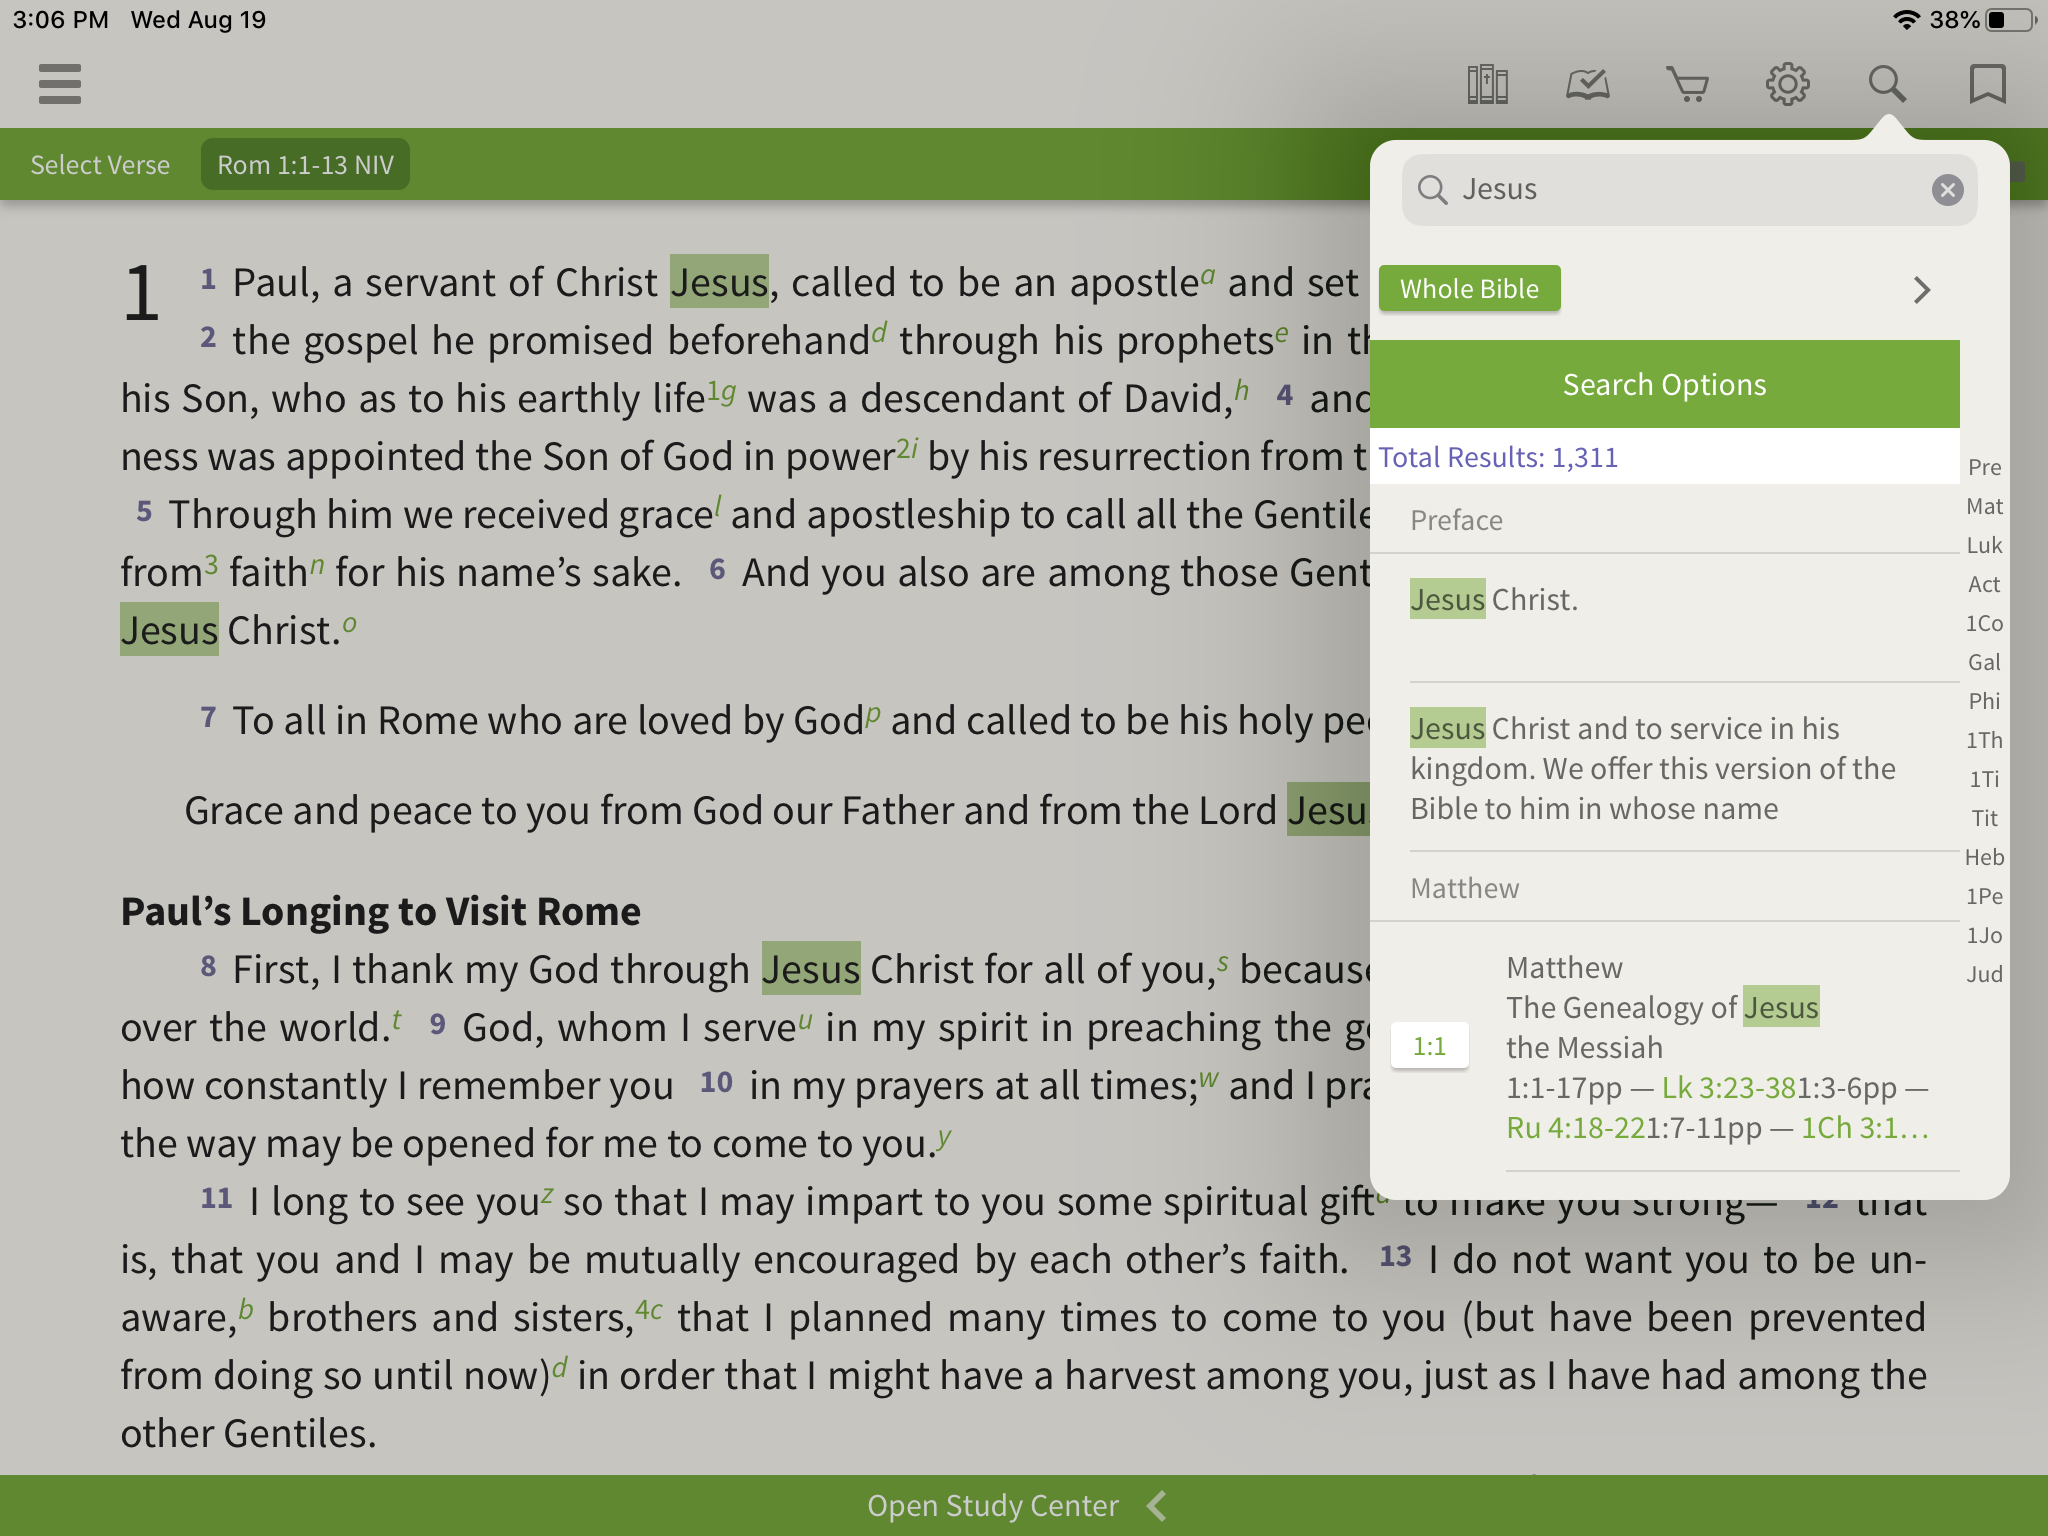 searching for "Jesus" in the olive tree bible app